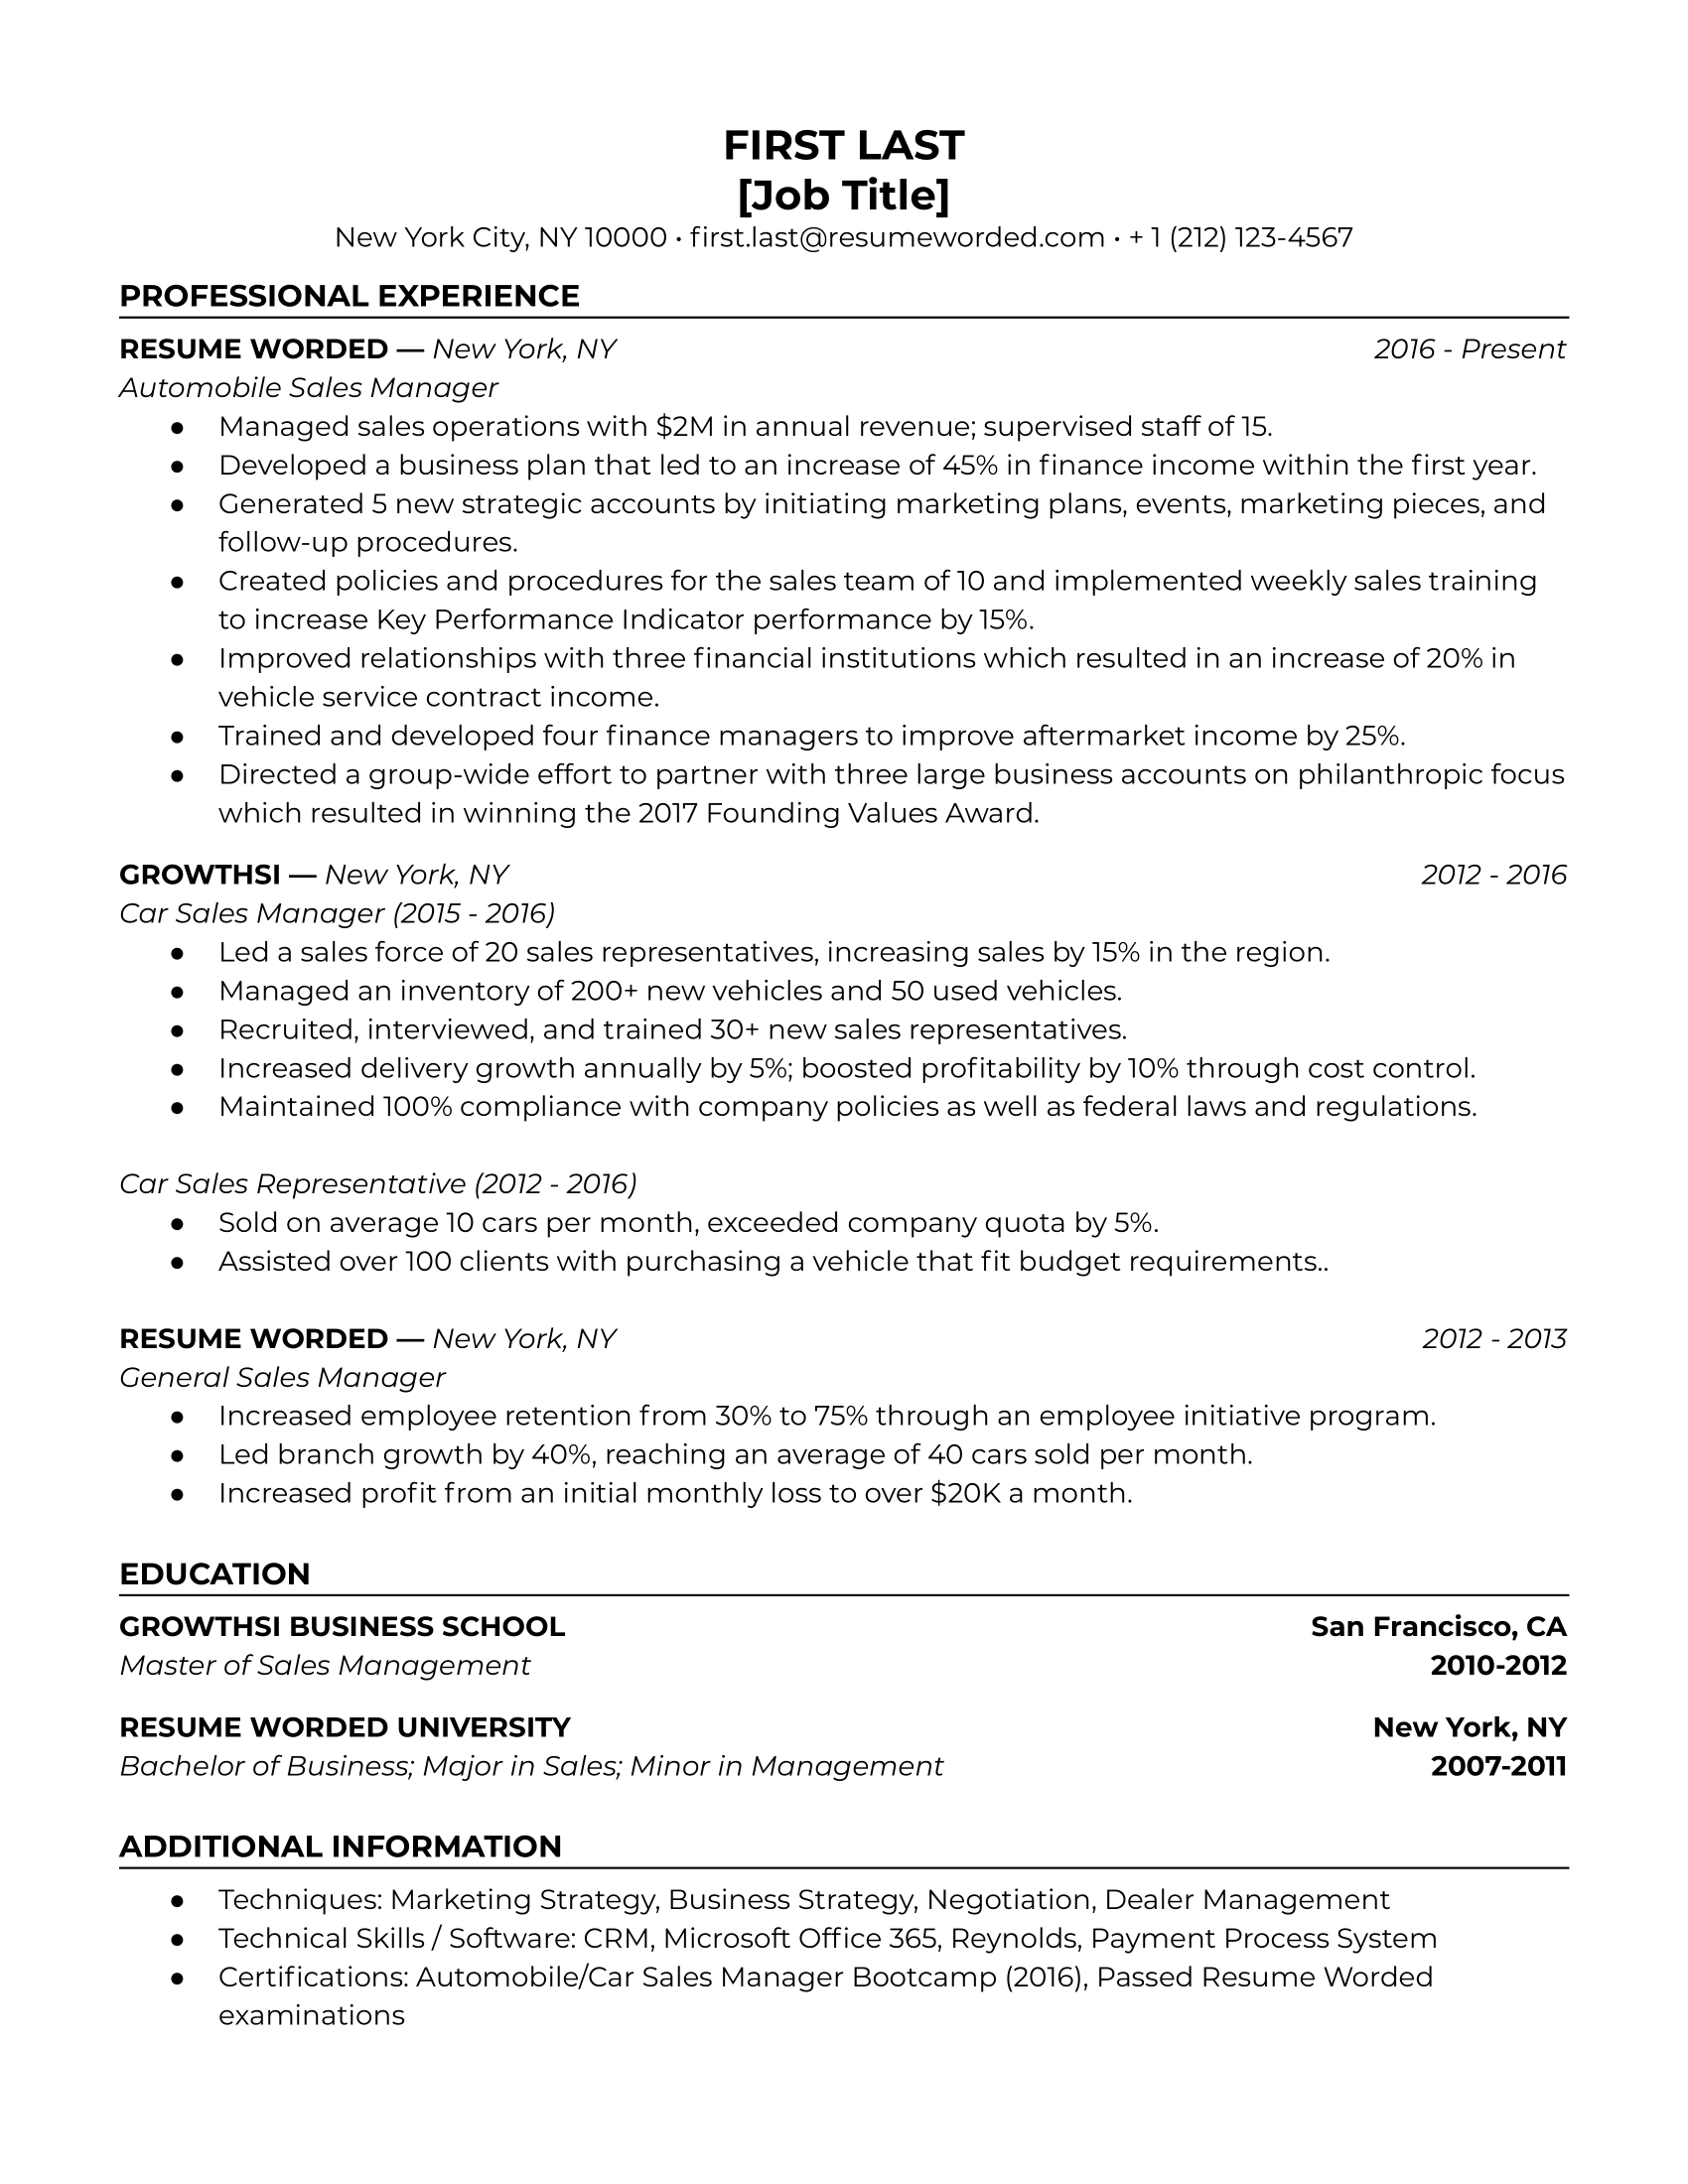 A resume for a automobile/car sales manager with a degree in business and prior experience as a car sales representative.